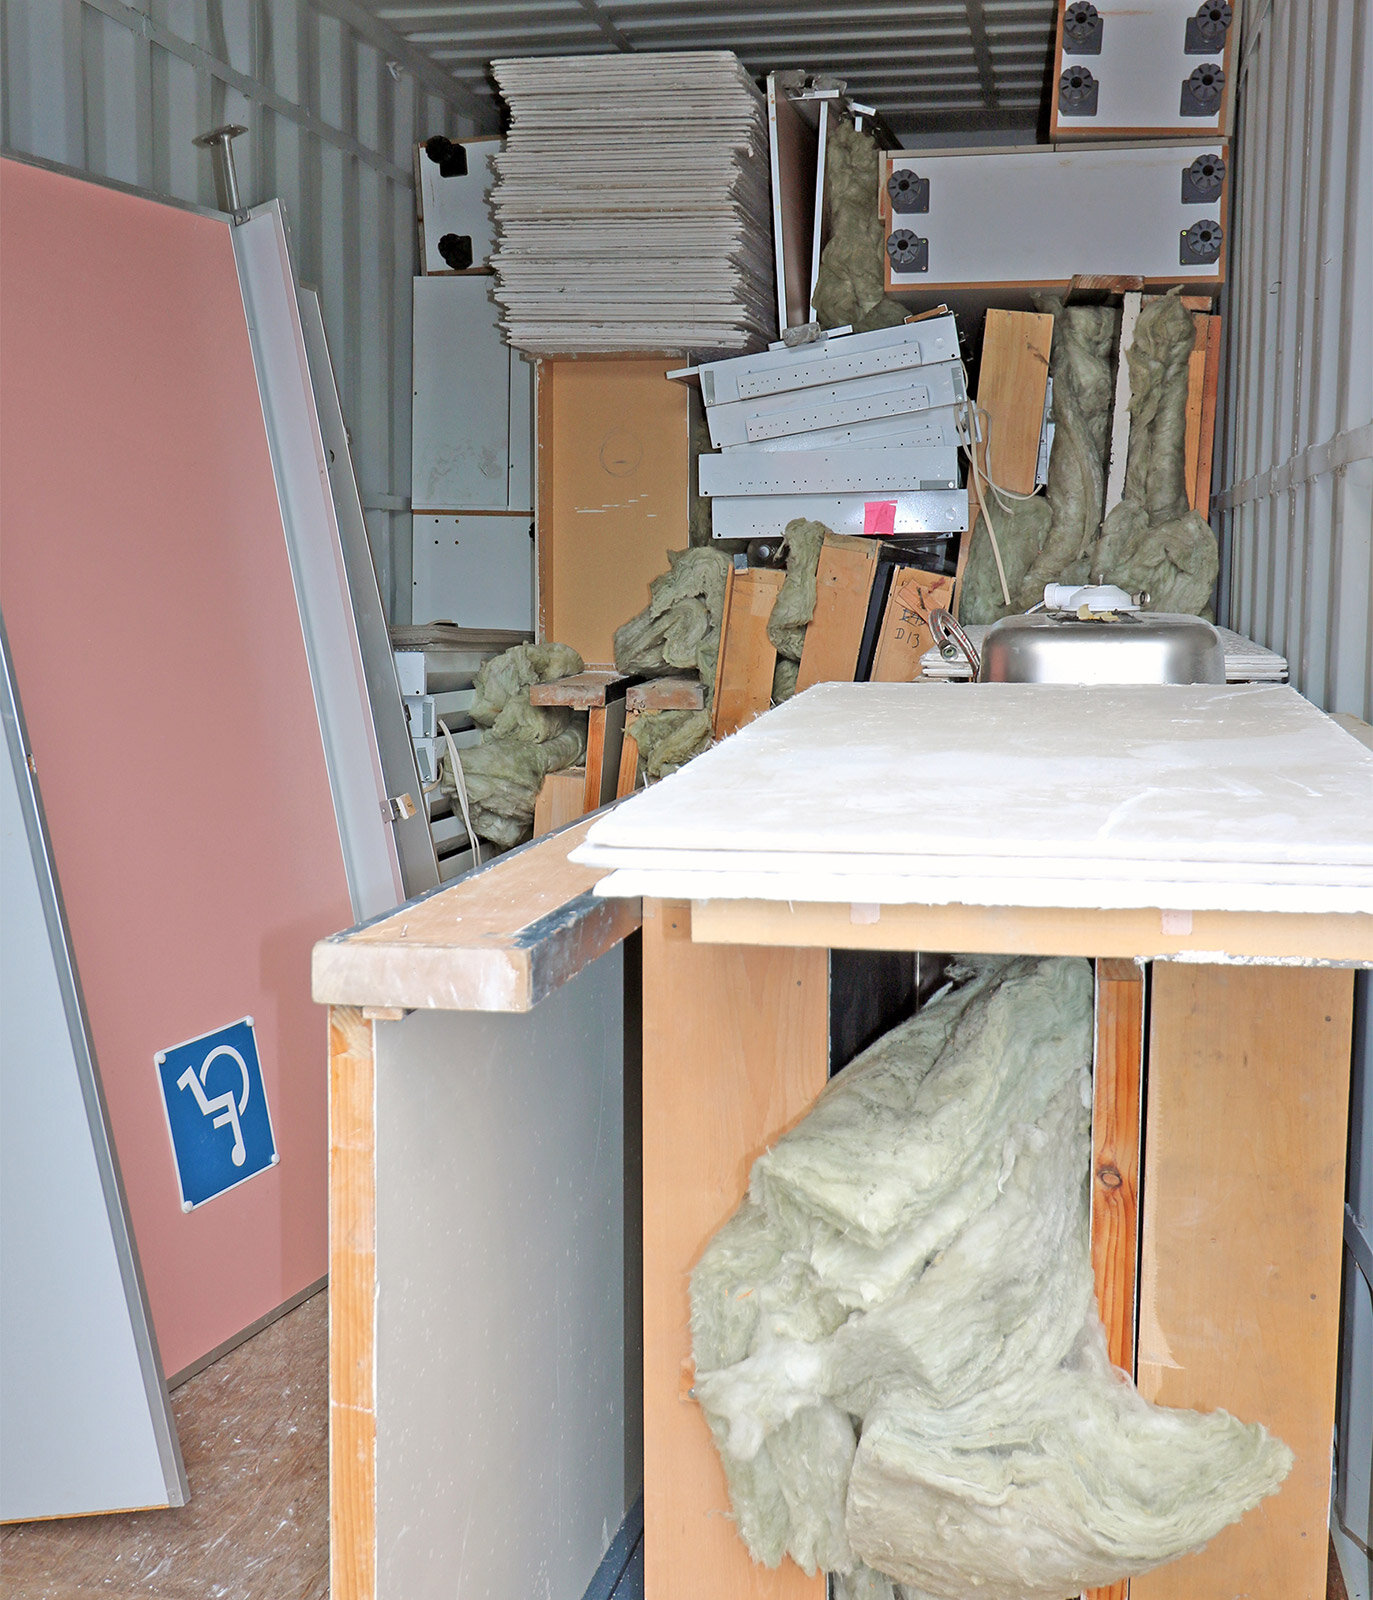   The containers were stacked full of desks, tables, doors, toilets, carpet tiles and cupboards  